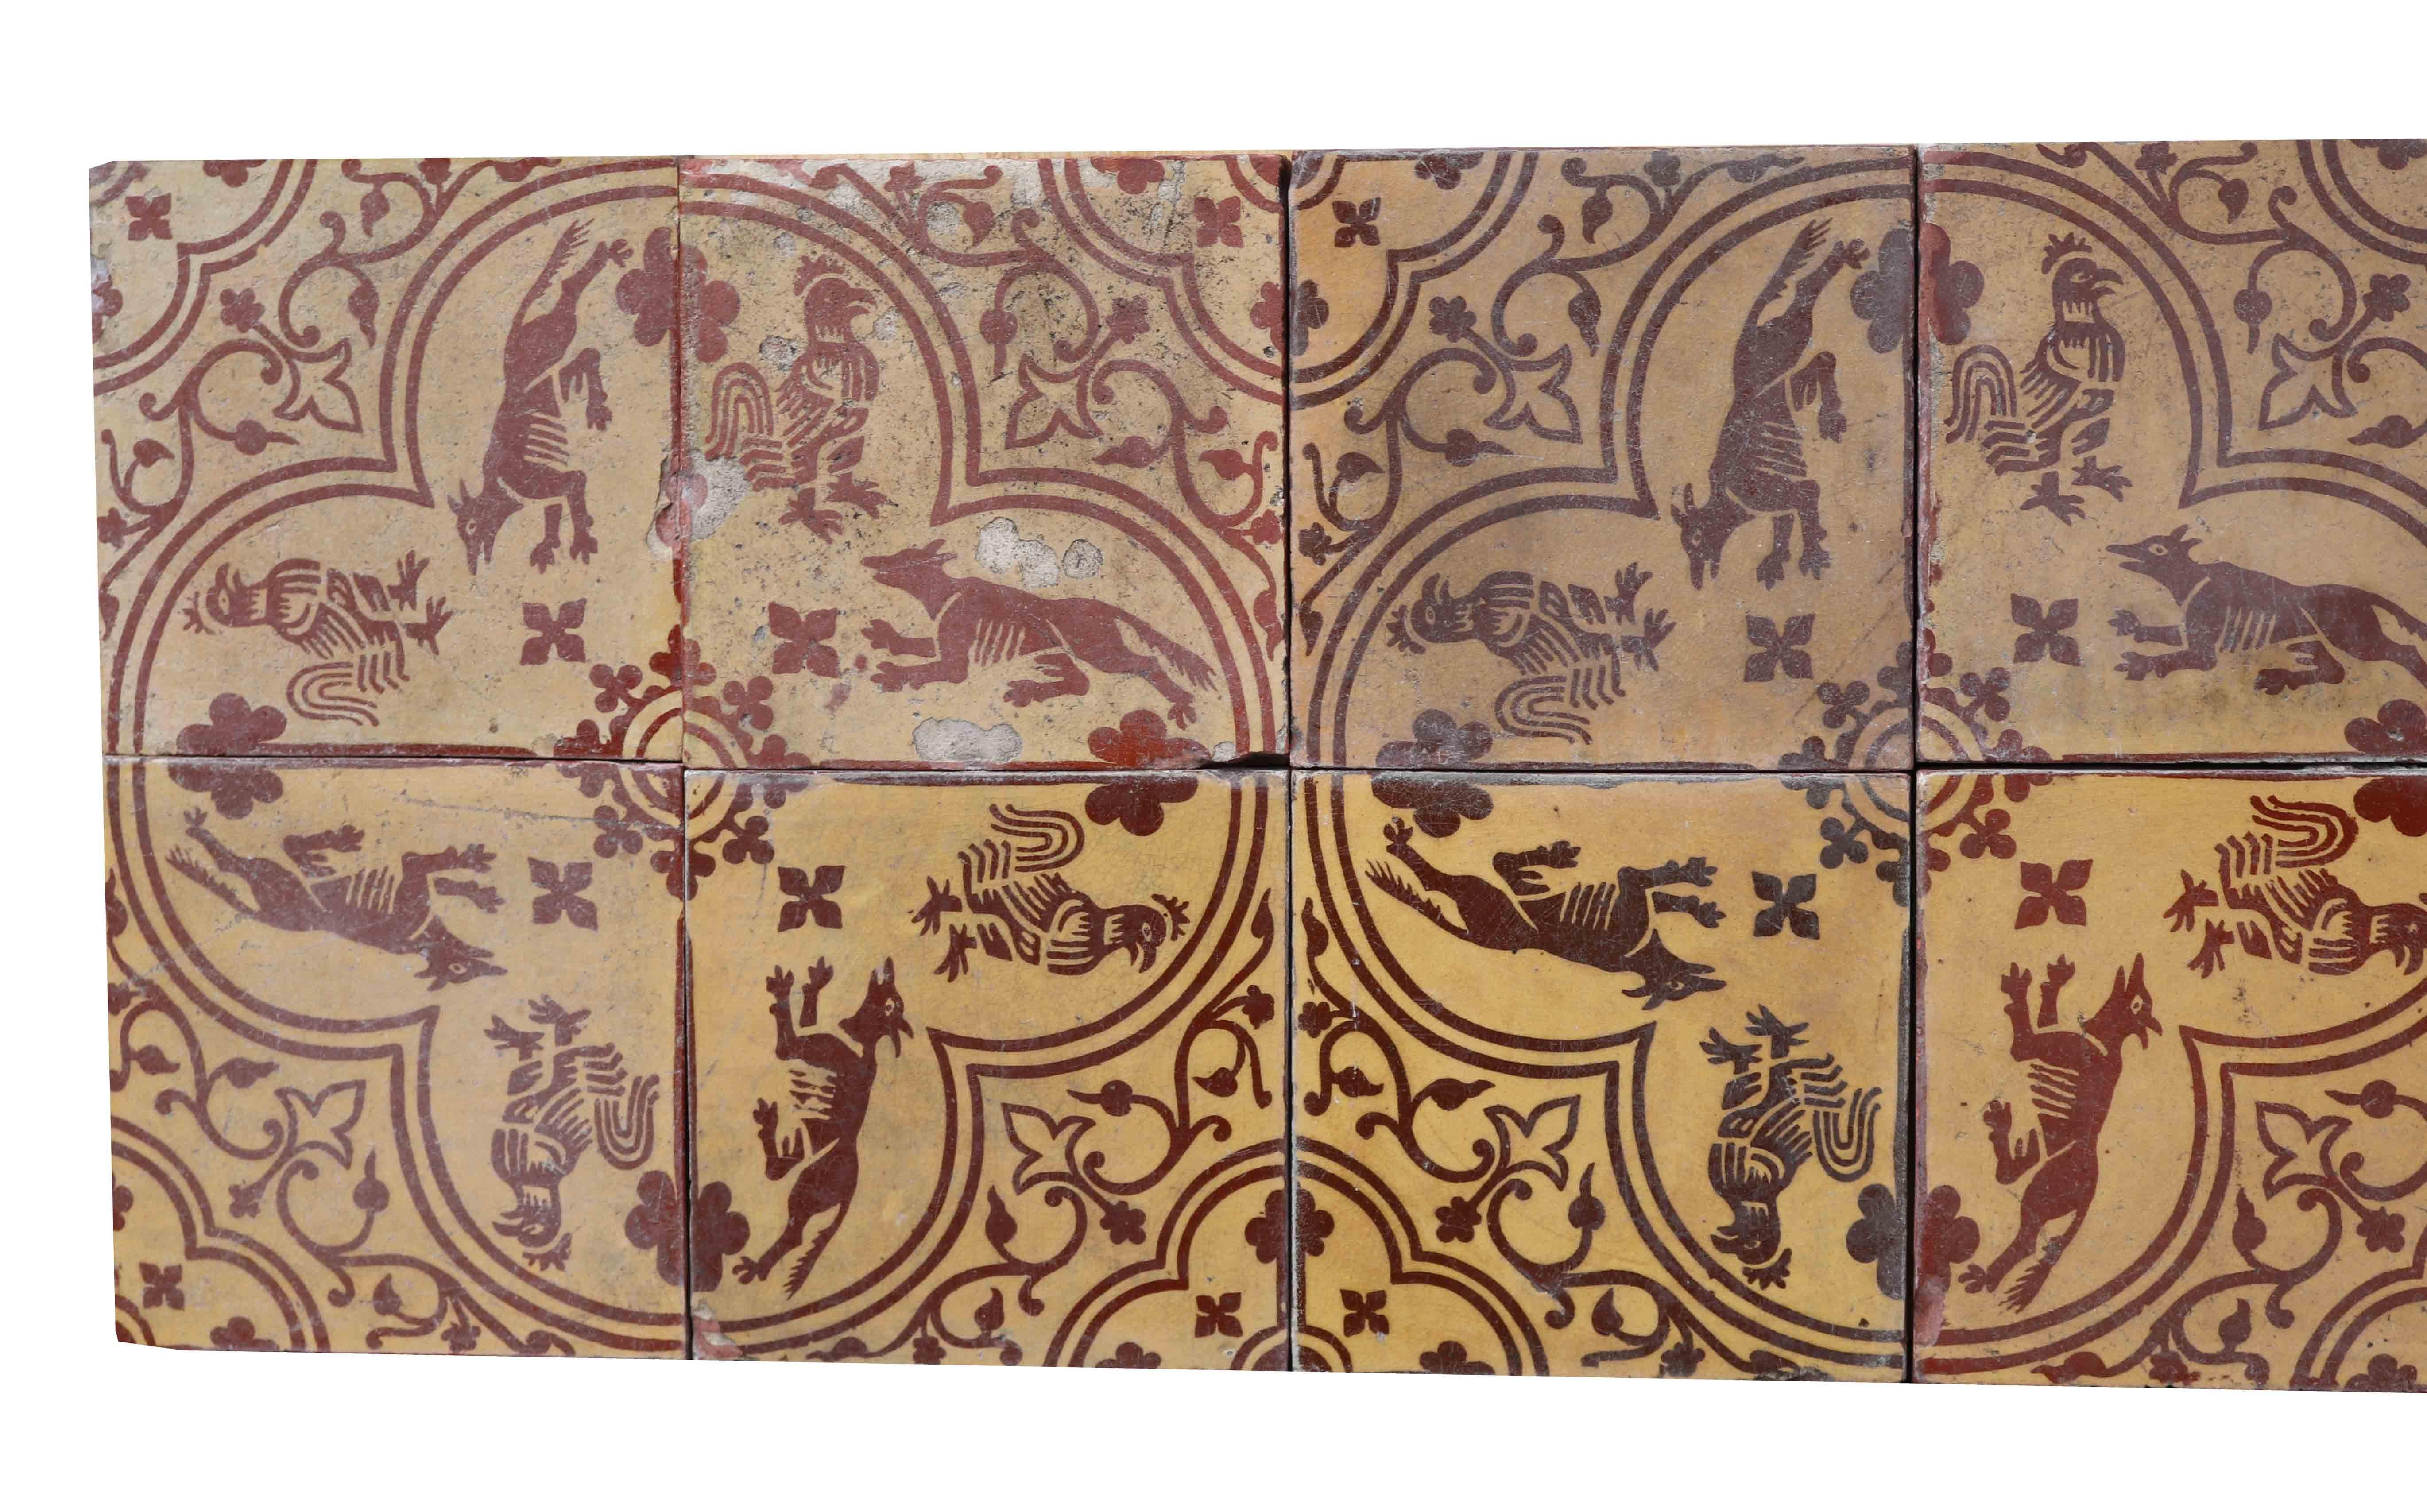 Twelve encaustic tiles (three, four tile panels) with a neo-medieval design.

Four tiles combine to form a quatrefoil with a fox and a hen in each foil and with quarter quatrefoils at the outer corners.